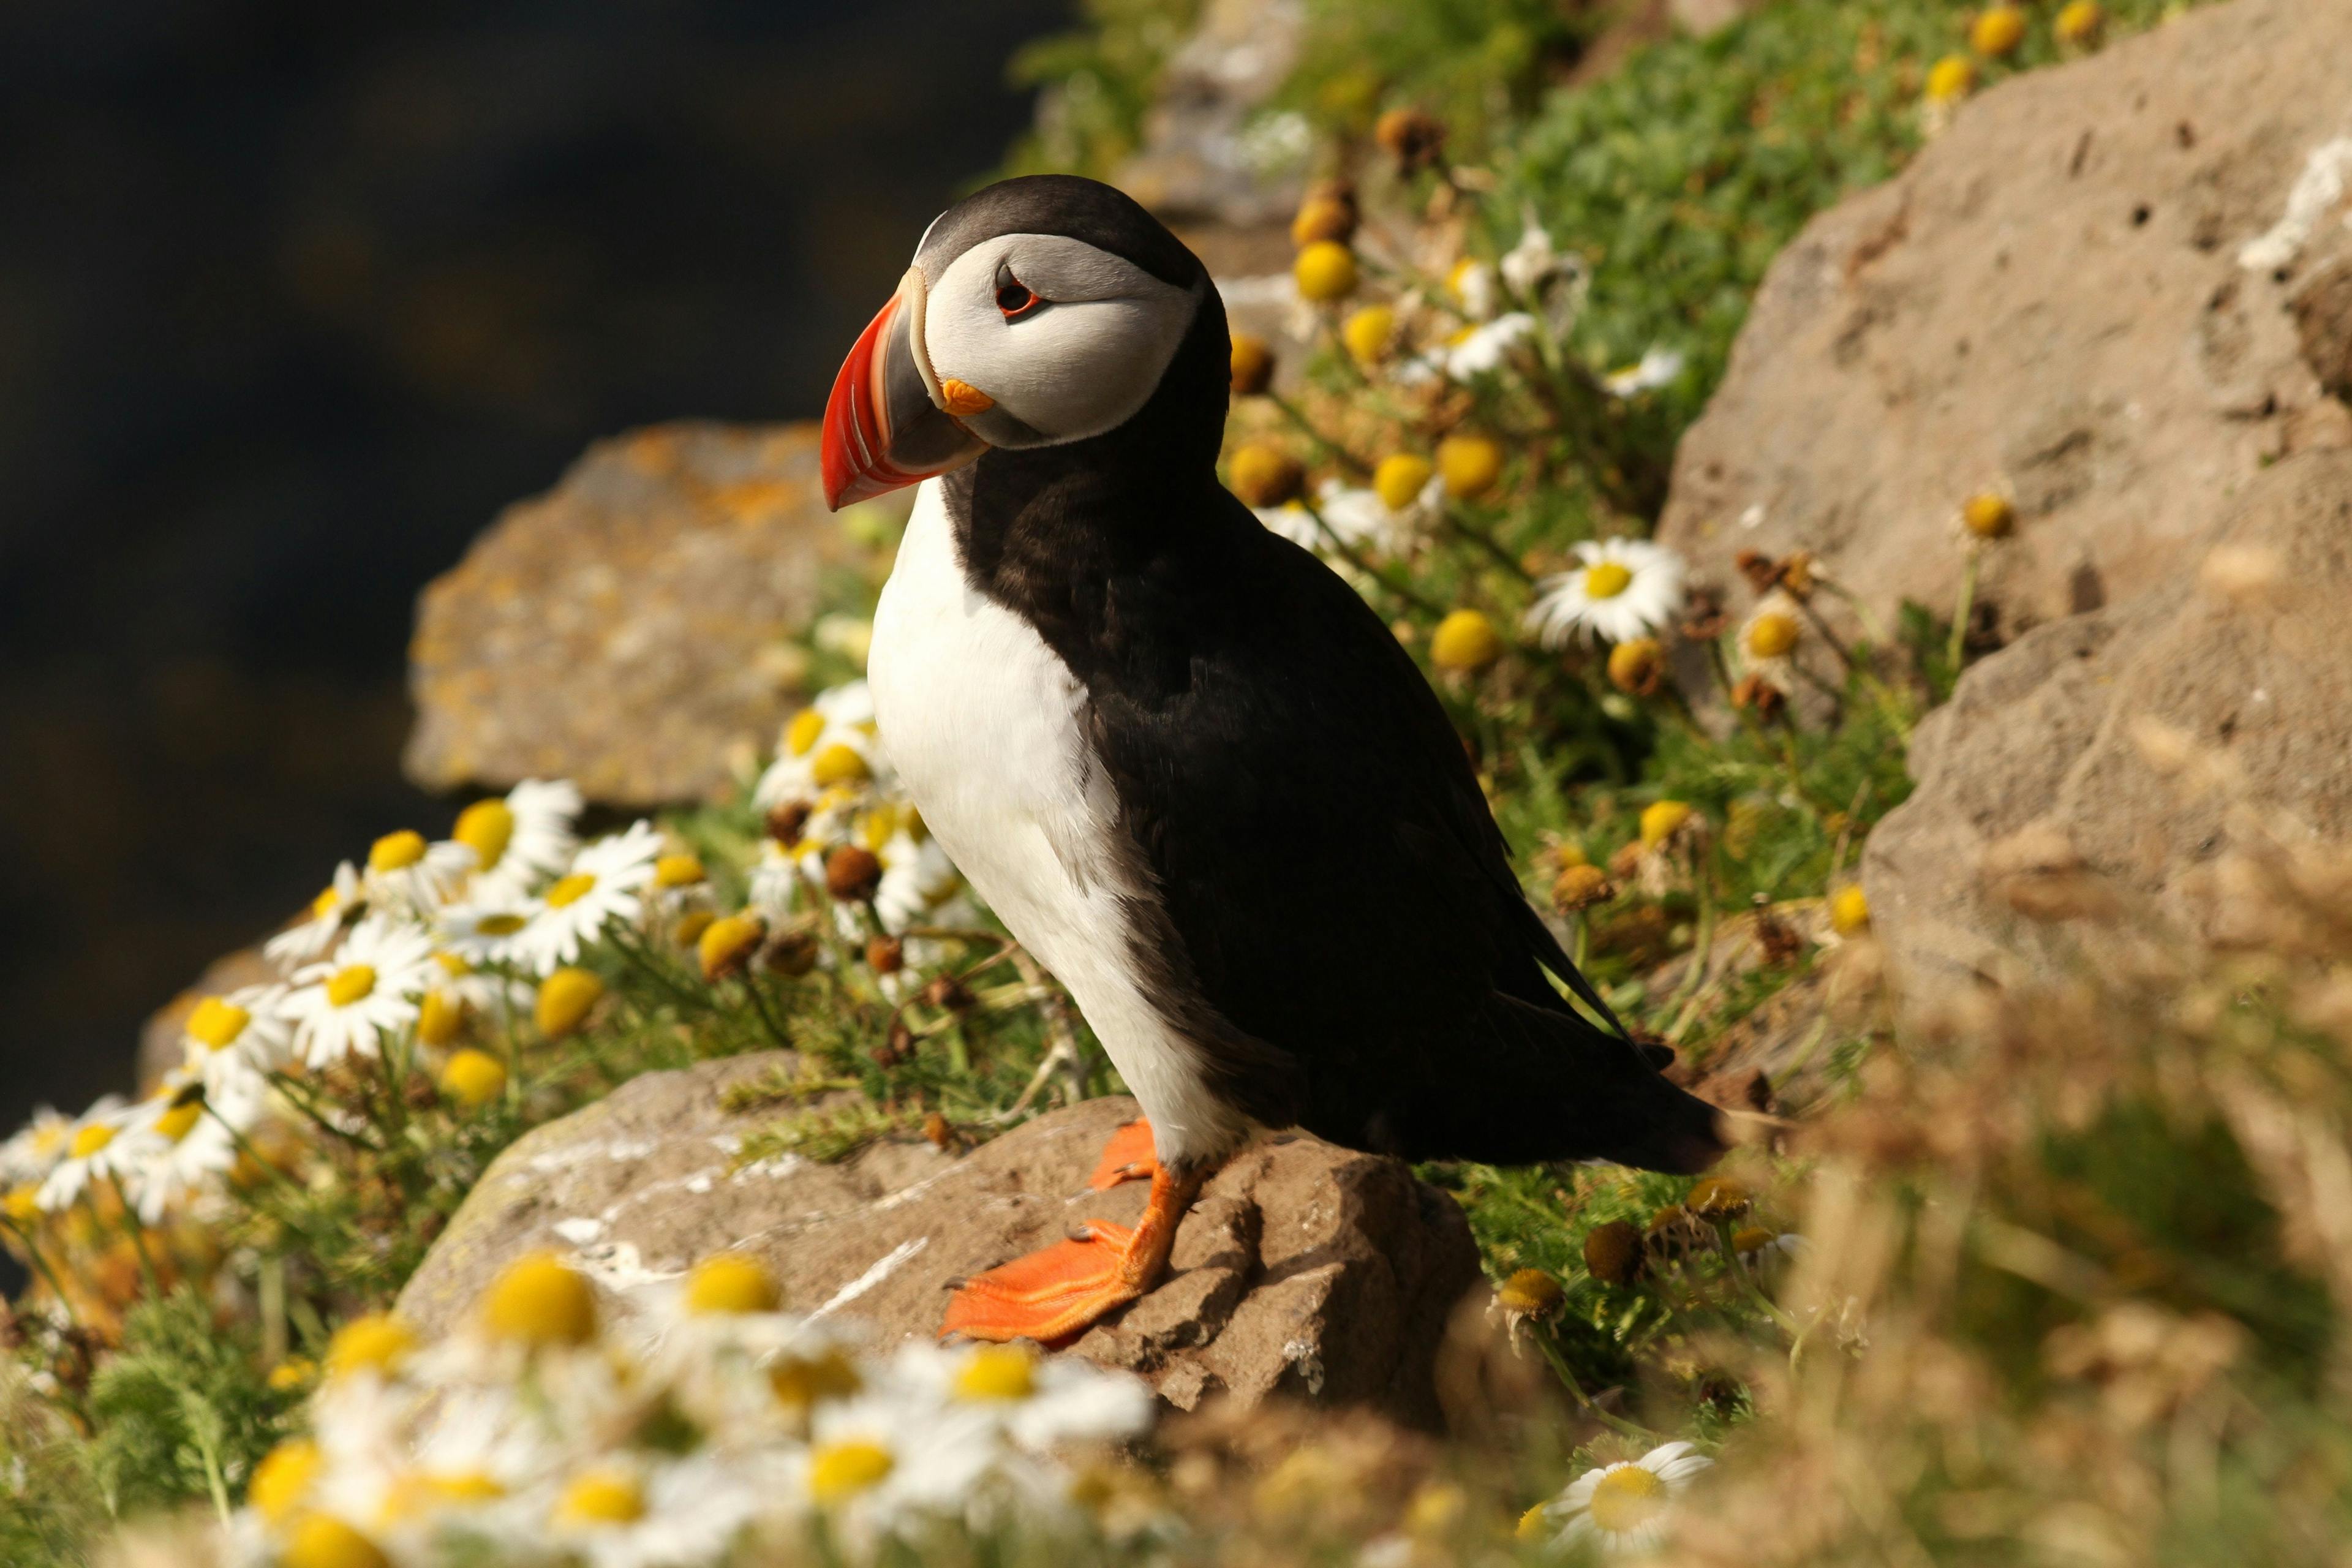 Puffin bird standing on a rock in Iceland.